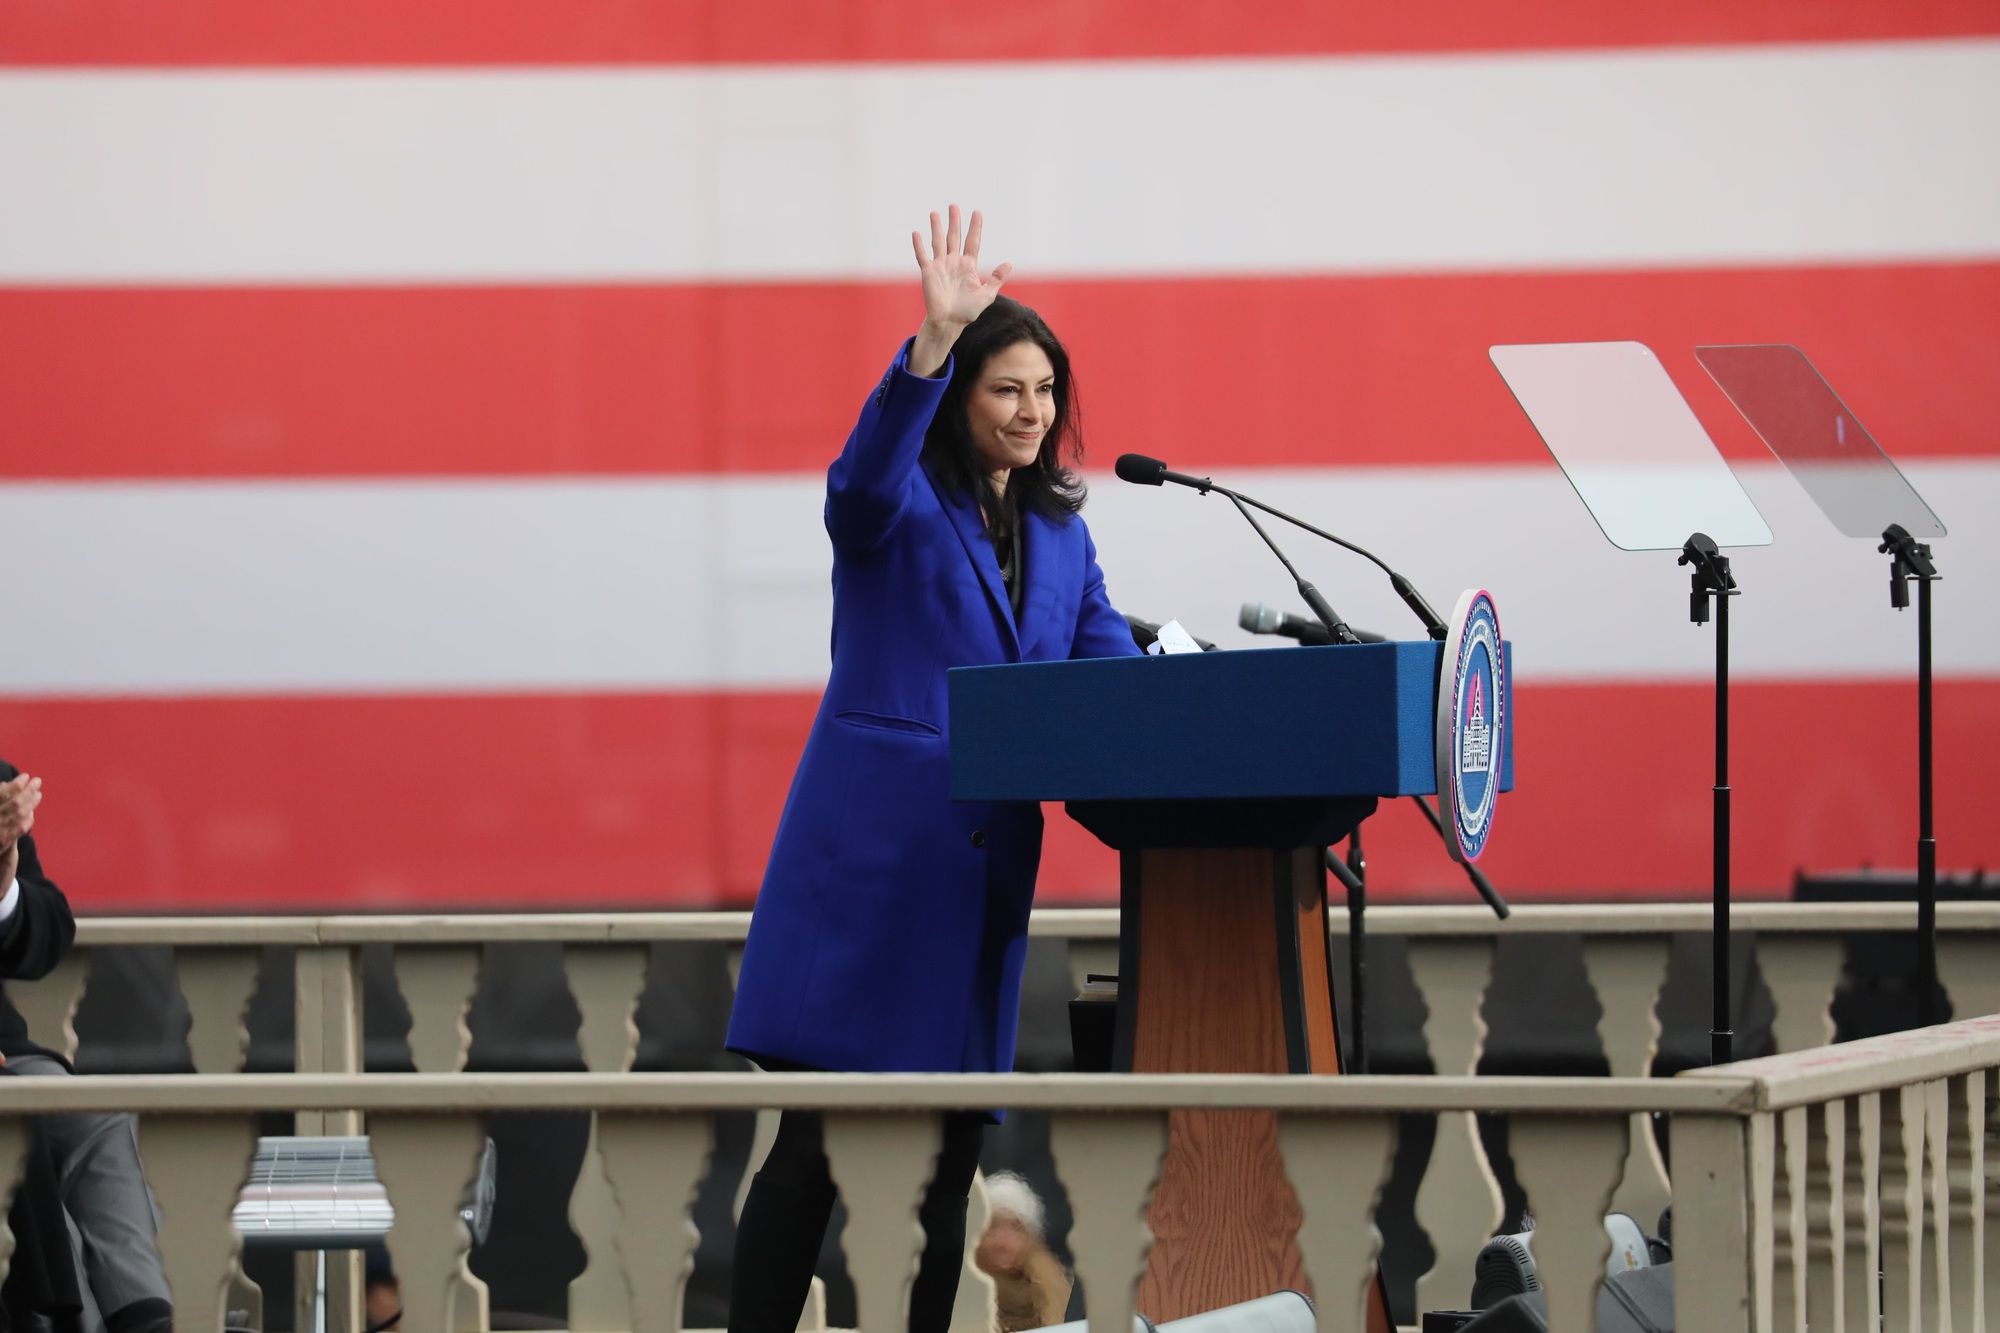 Attorney General Dana Nessel addresses the crowd at the inauguration ceremony